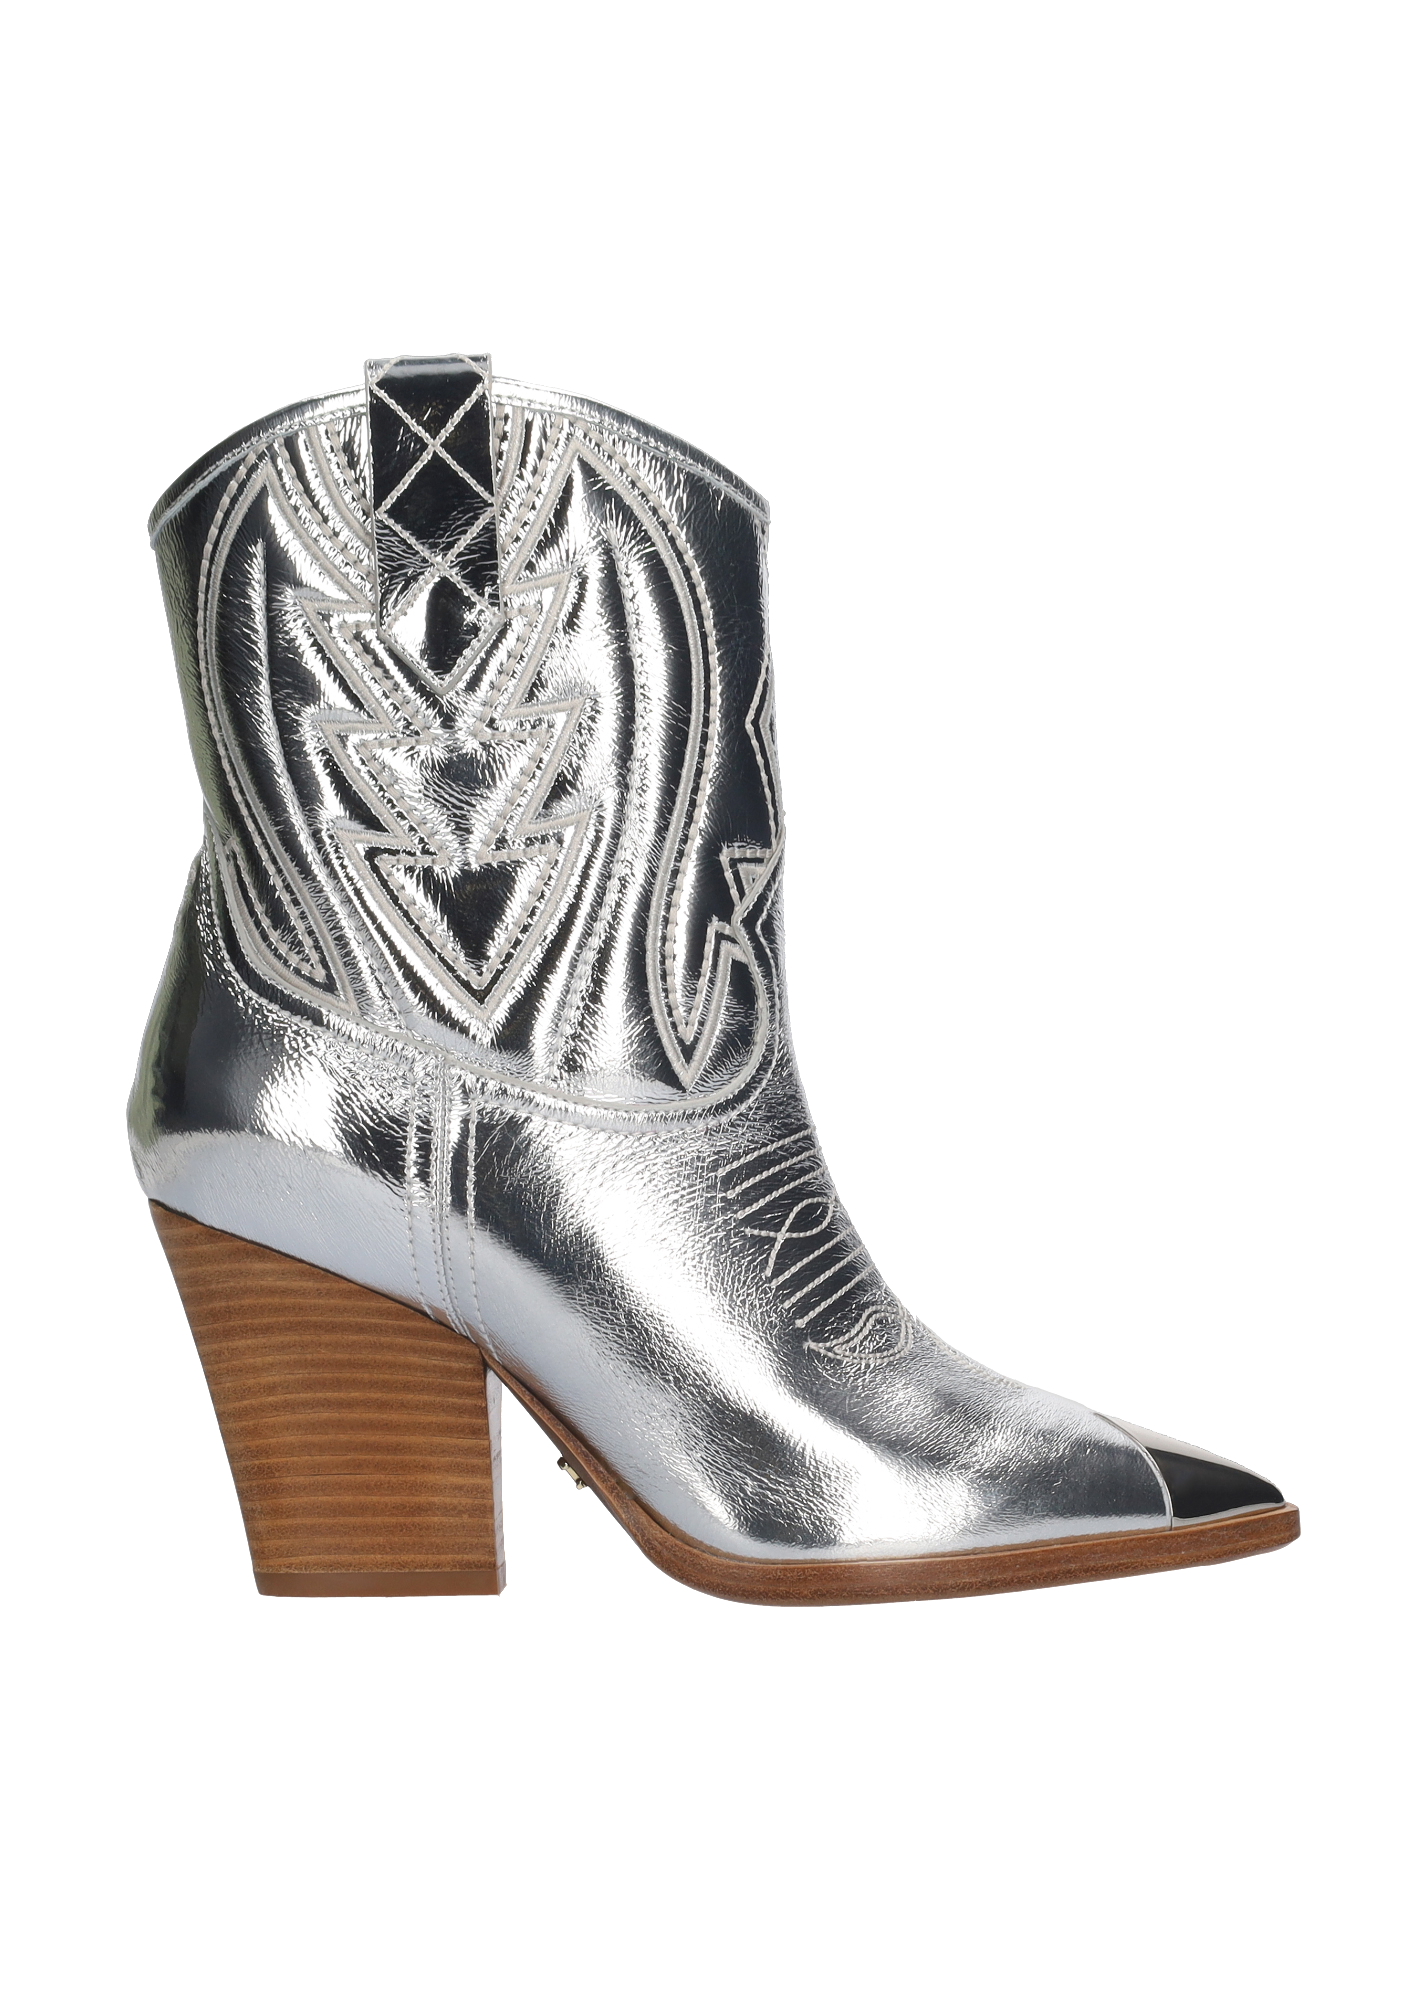 Lola Cruz Shoes Gambels Boots 85 In Silver